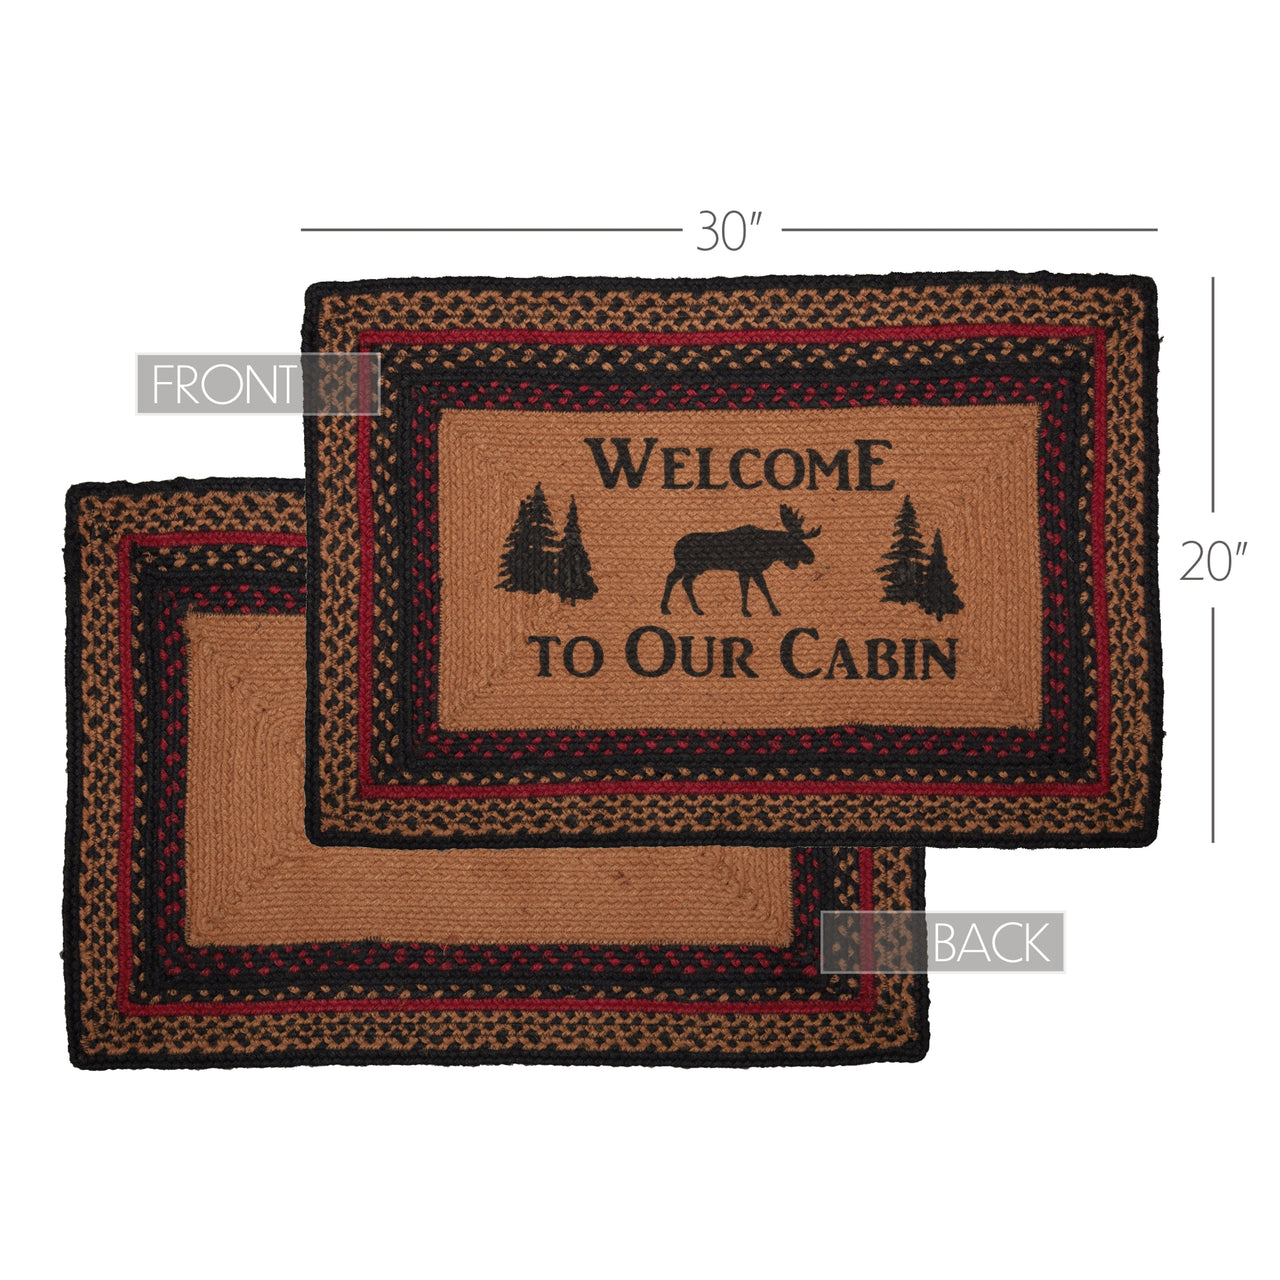 Cumberland Stenciled Moose Jute Braided Rug Rect Welcome to the Cabin 20"x30" with Rug Pad VHC Brands